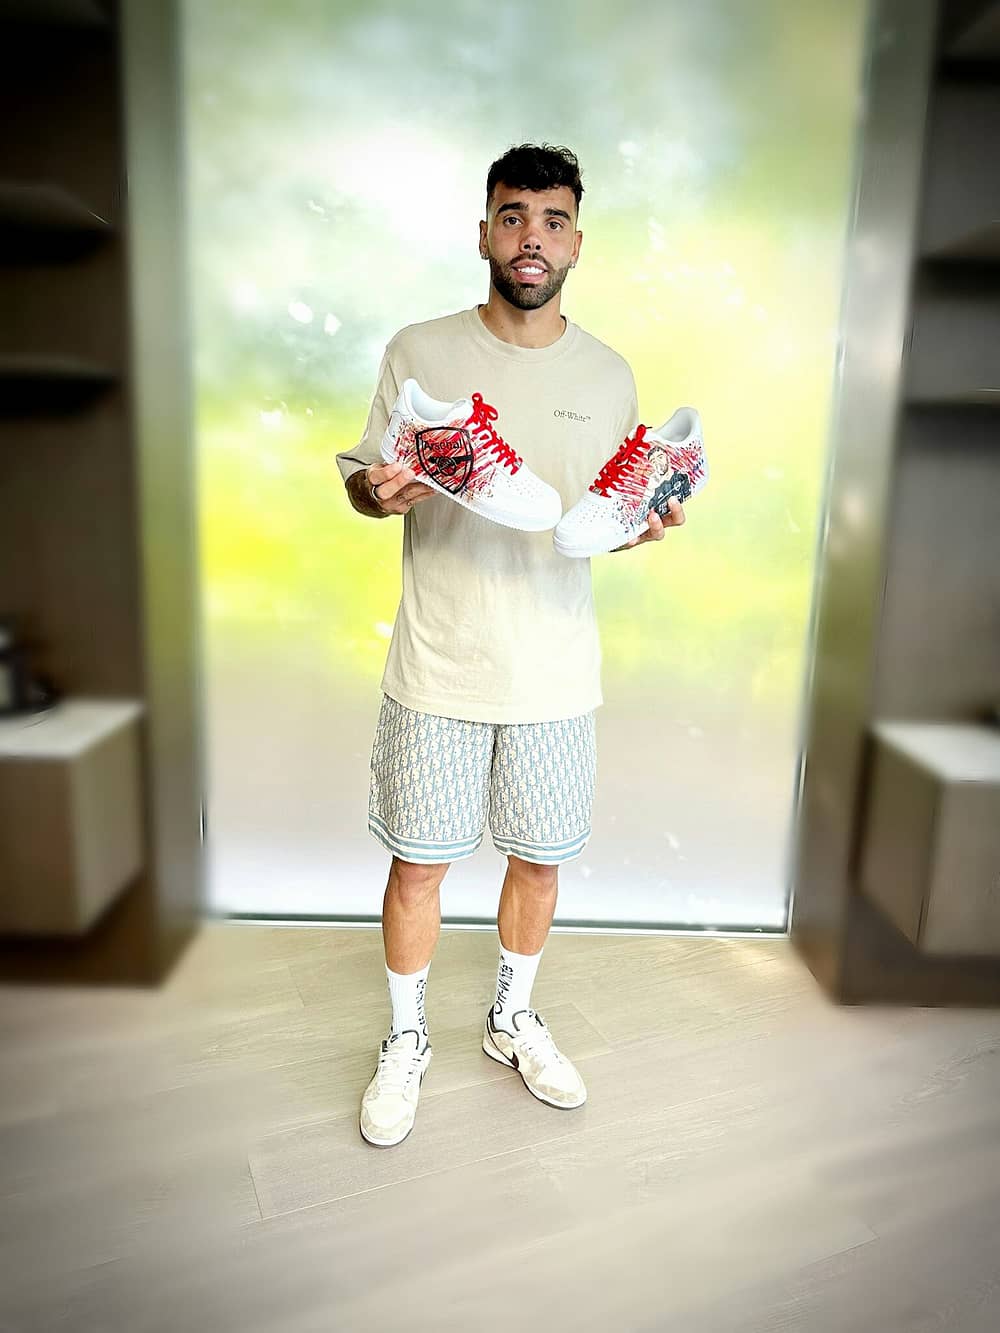 David Raya Arsenal FC Nike AF1 sneakers celebrity client holding his custom painted sneakers